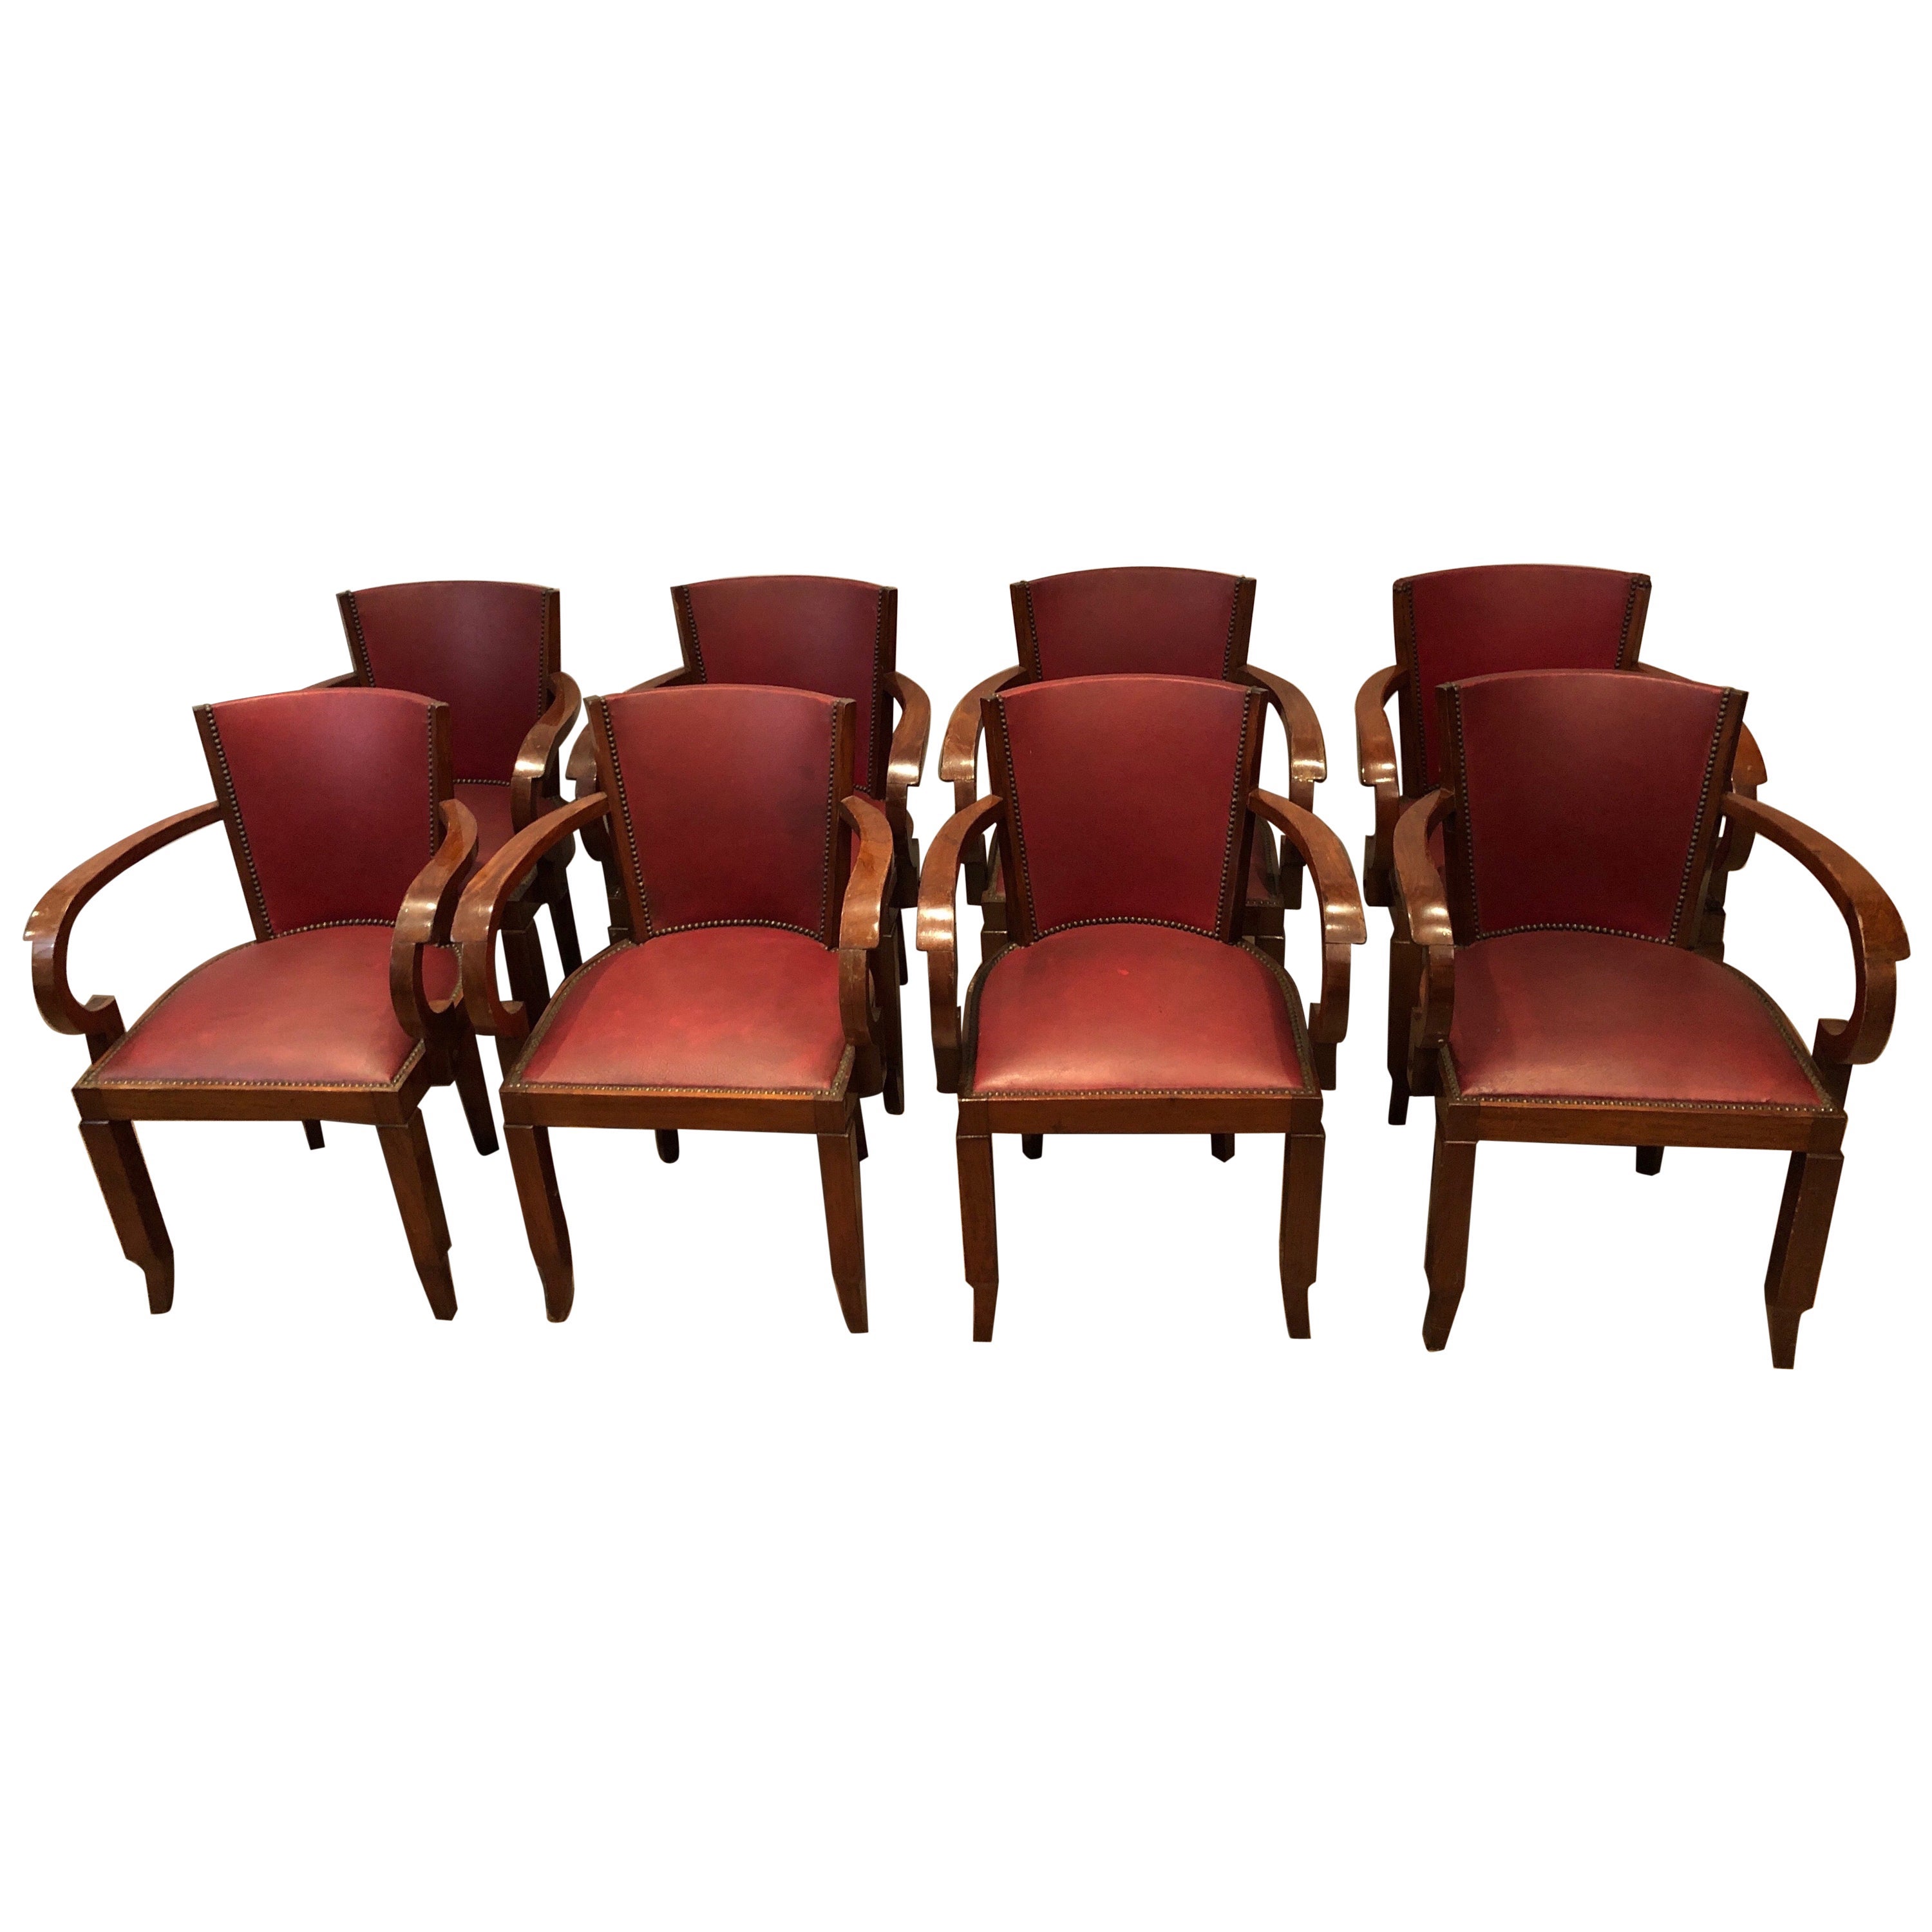 Rare Set of 8 Mahogany and Faux-Leather Art Deco Armchairs, French, circa 1930 For Sale